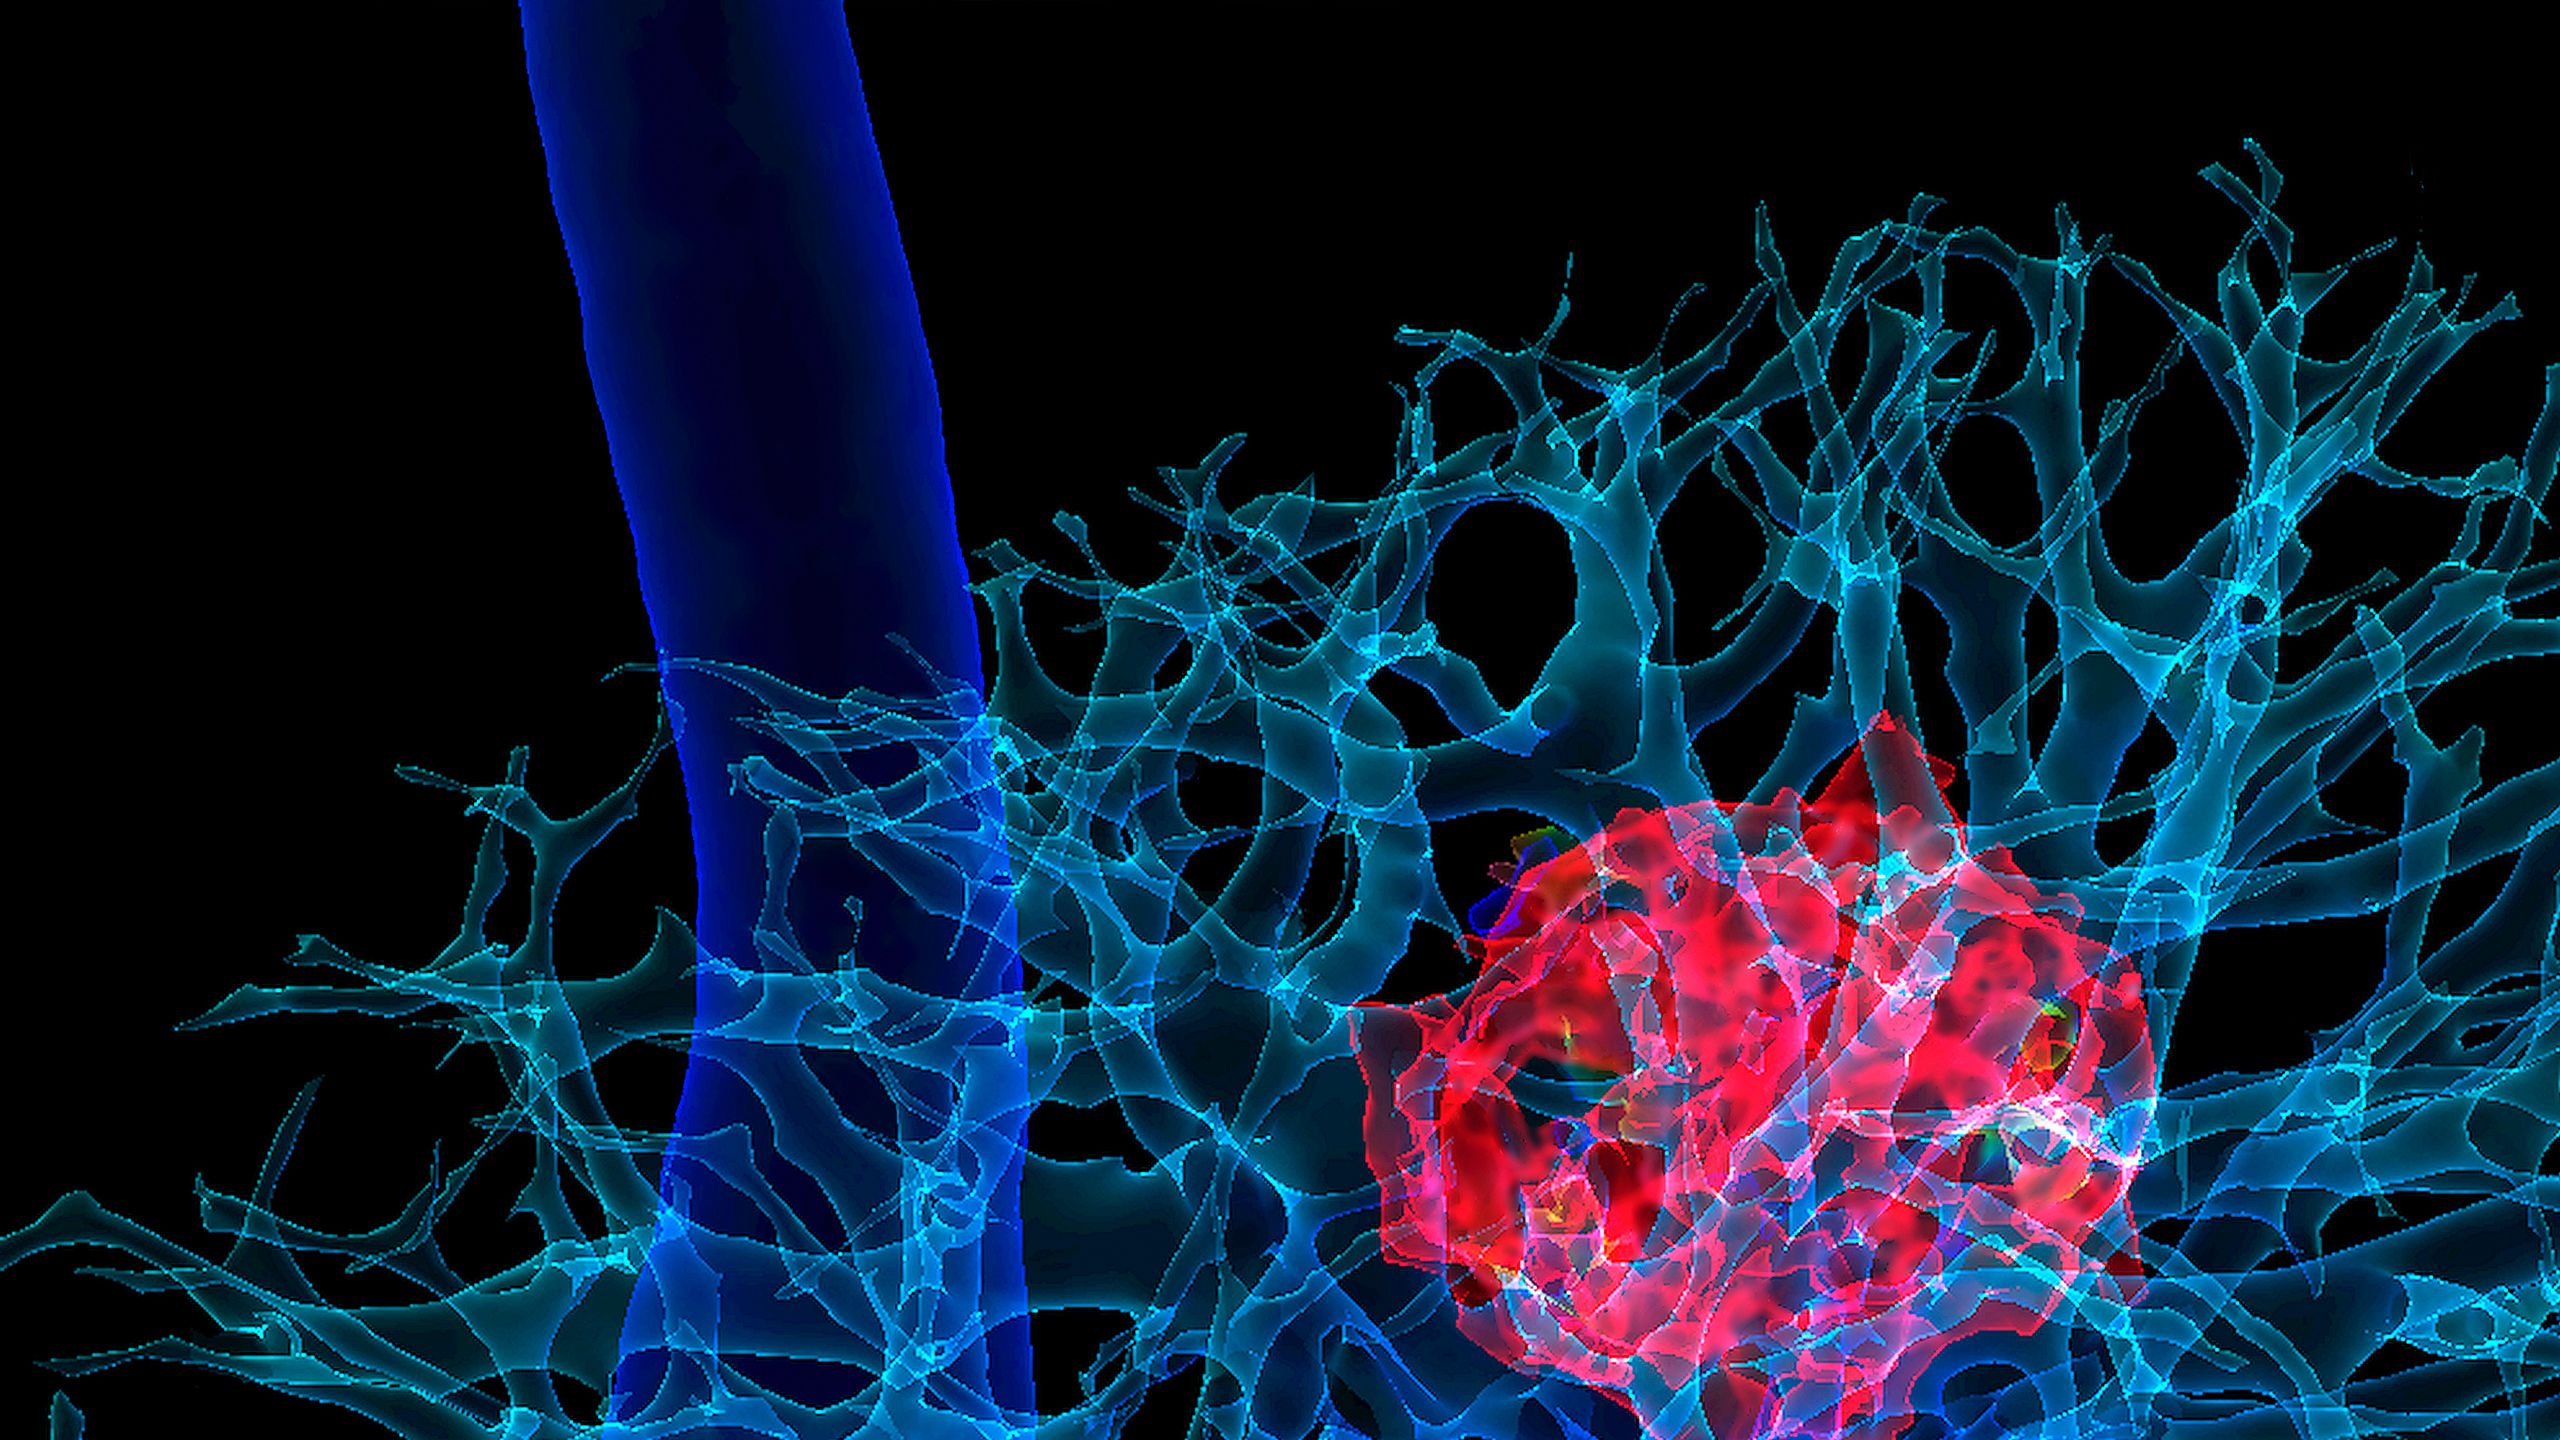 A stock image of body imaging, showing a red mass within blue and aqua circulatory networks. 